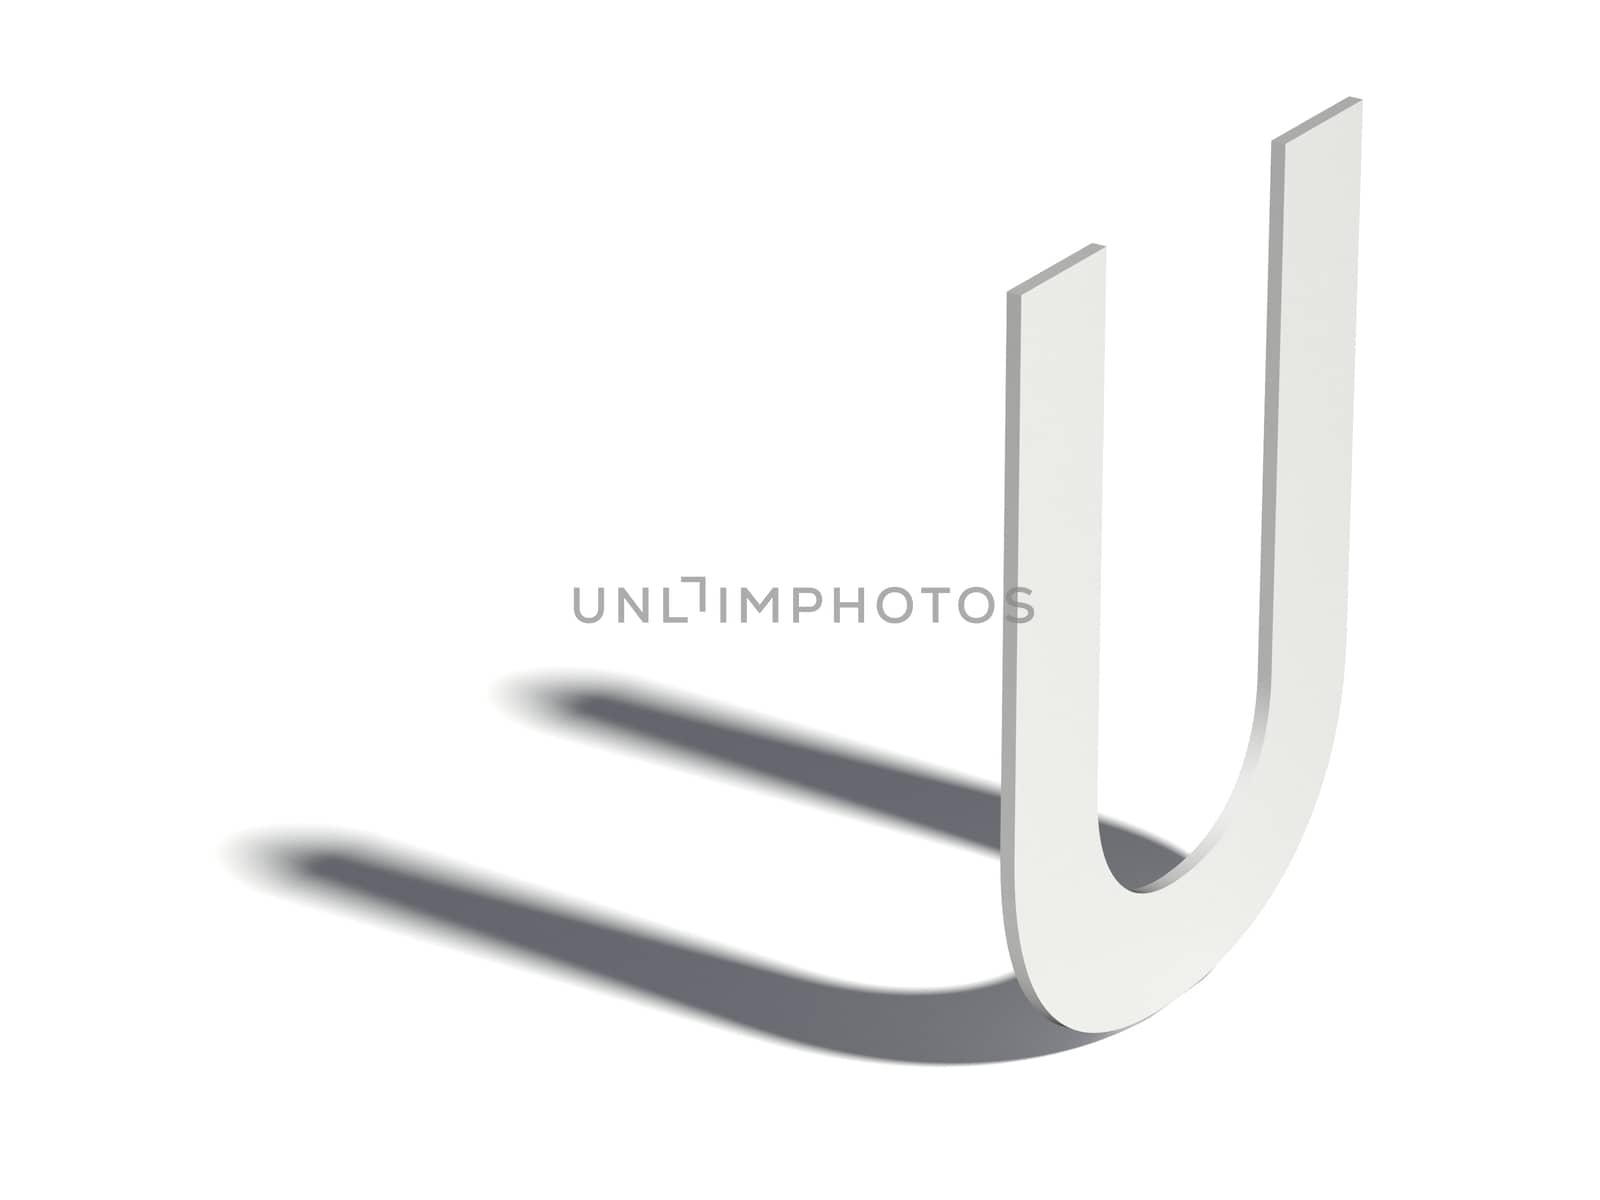 Drop shadow font. Letter U. 3D render illustration isolated on white background